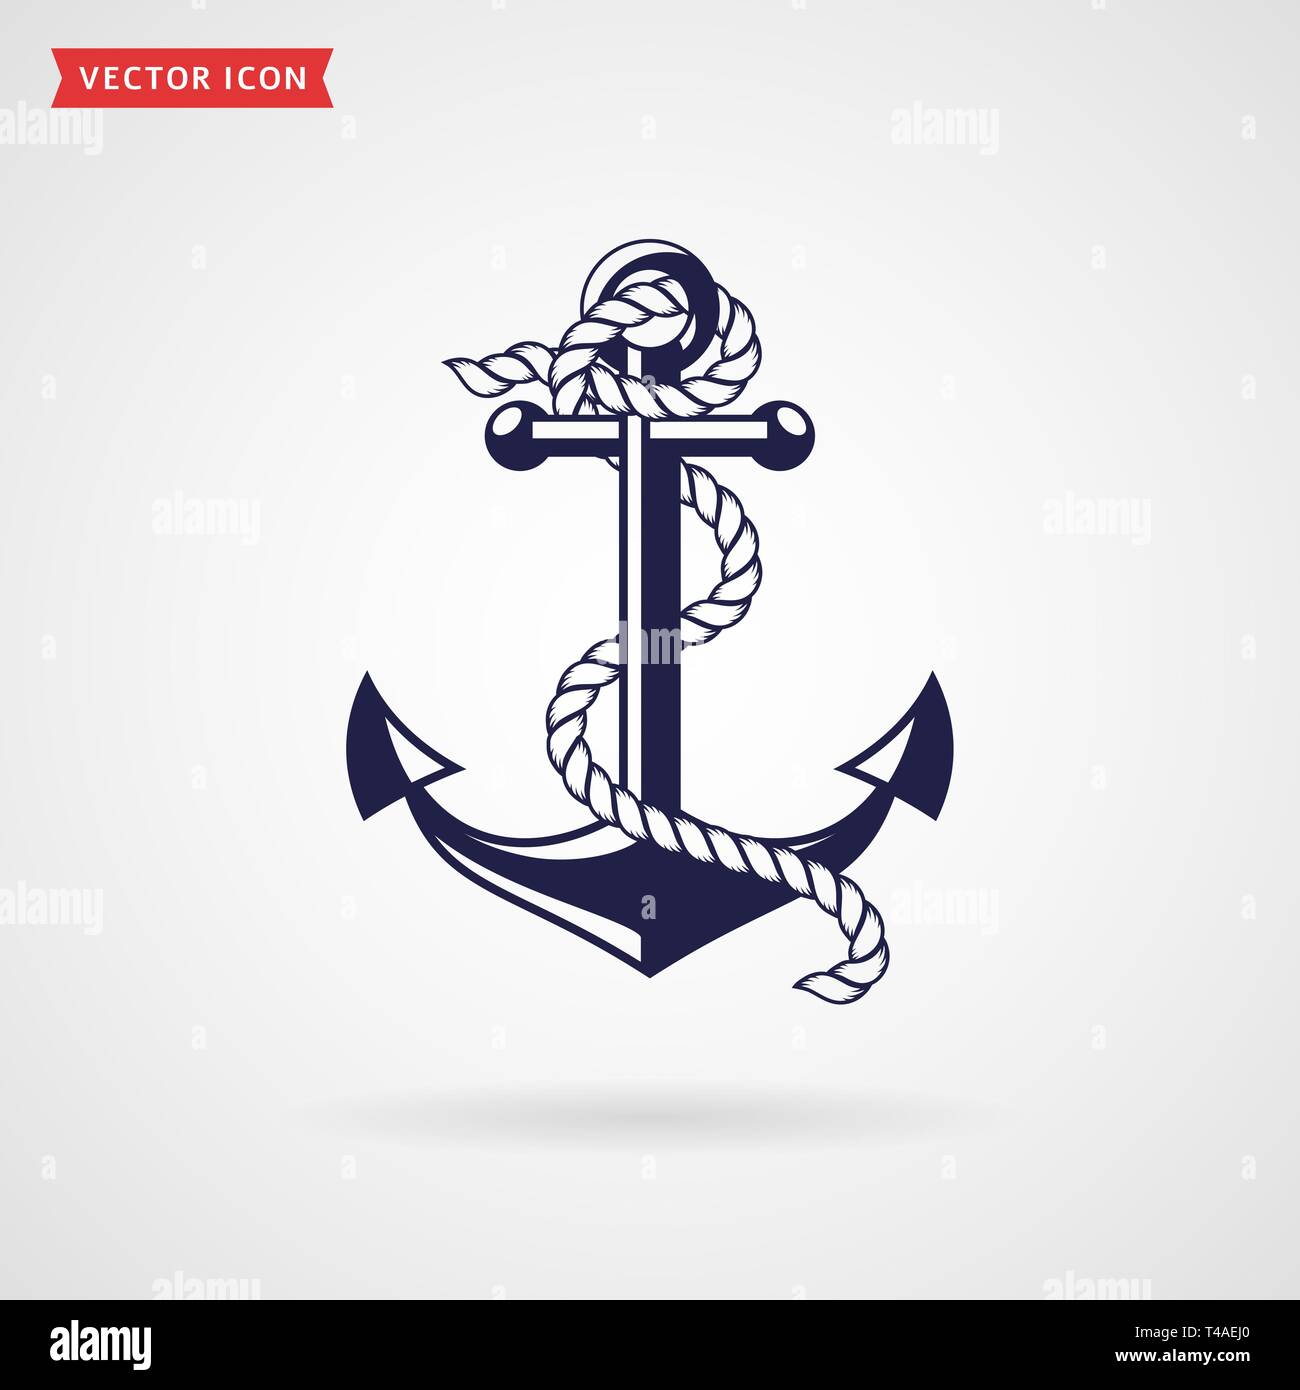 Anchor rope vector vectors Stock Vector Images - Alamy